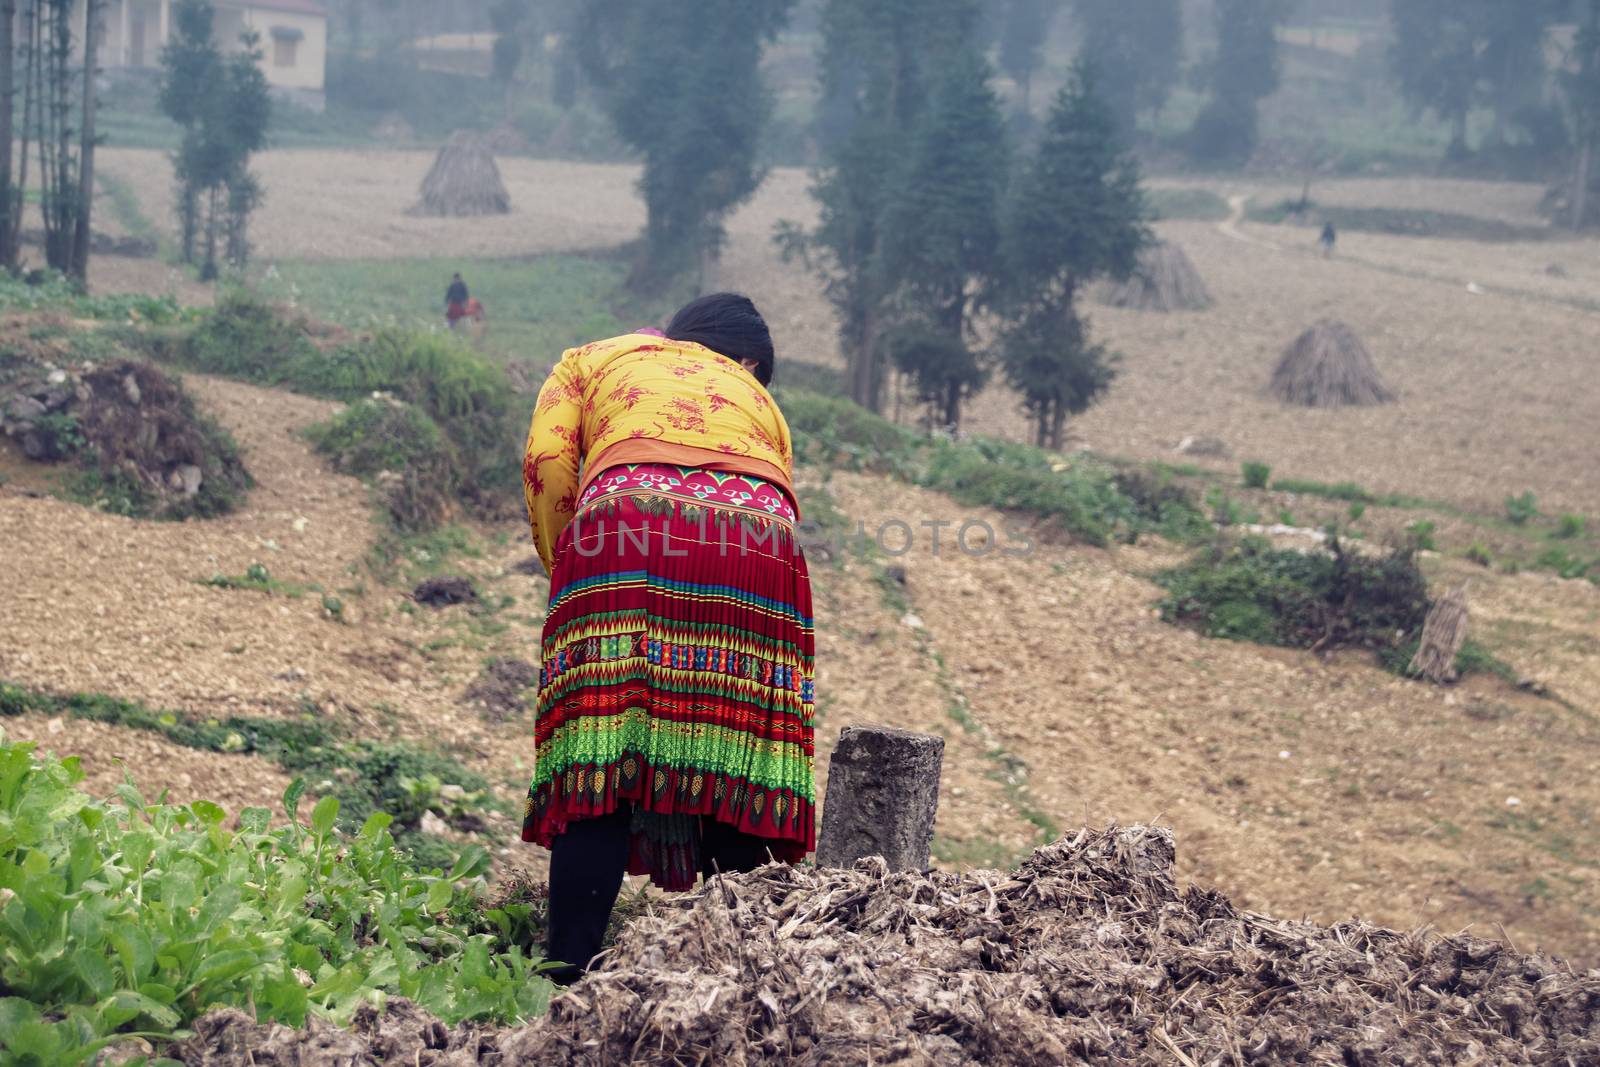 Editorial. A woman from the Hmong Tribe harvesting rapeseed in Dong Van, Vietnam